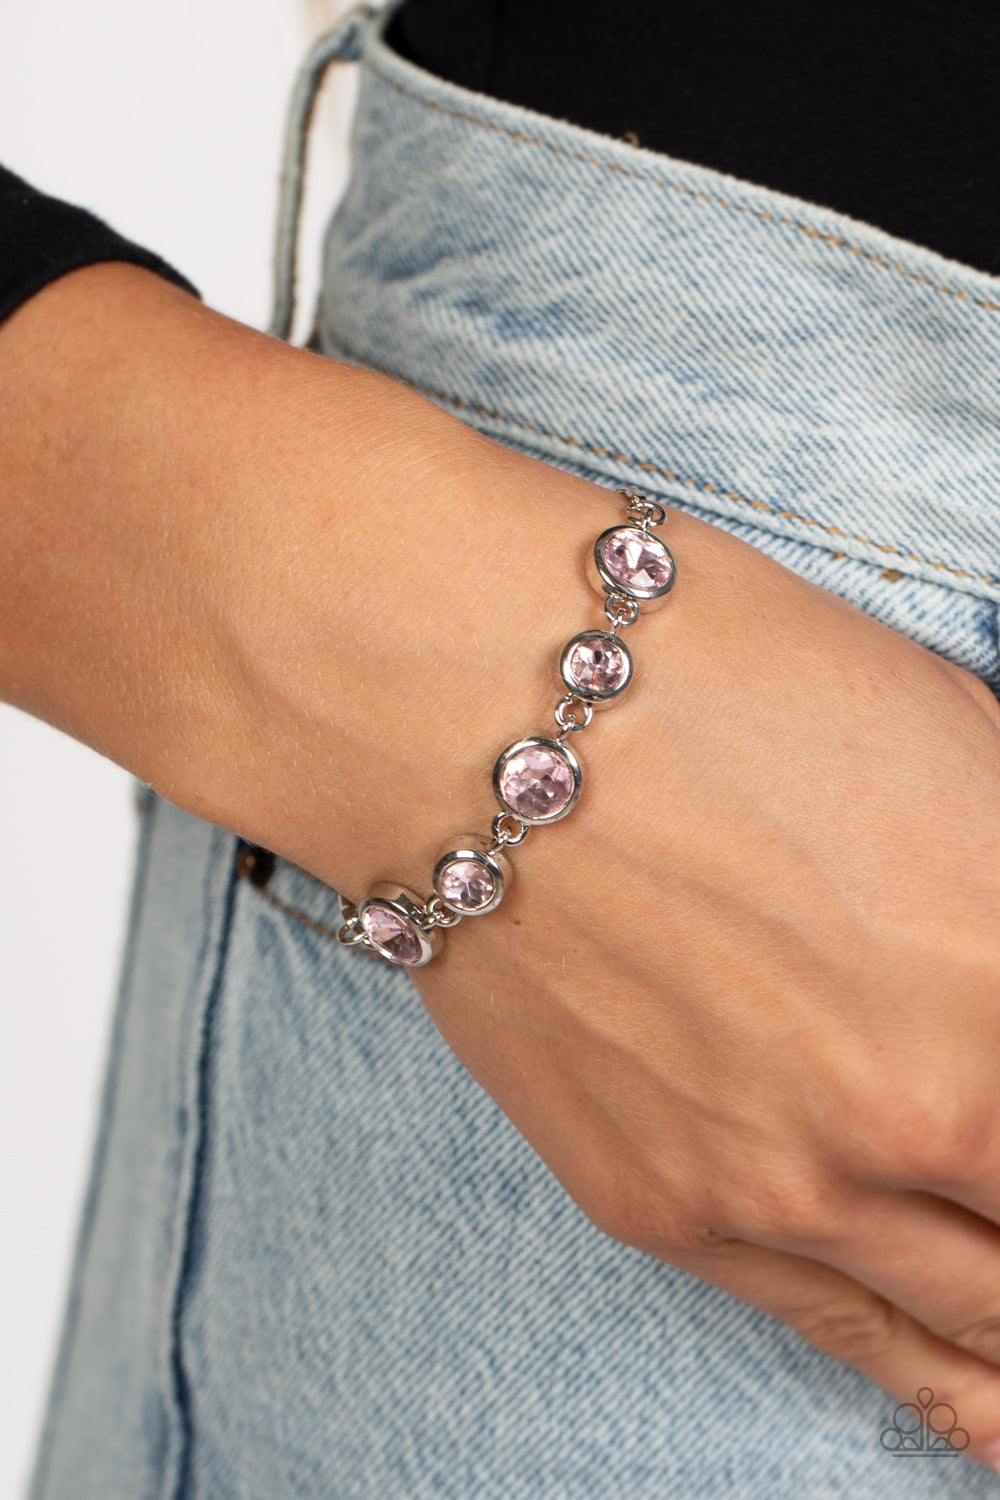 Classically Cultivated - Pink and Silver Bracelet - Paparazzi Accessories - Varying sizes of classic, round, brilliant-cut pink rhinestones set in thick, circular, silver frames link together around the wrist with glamorous glimmer. The rhinestones attach to a dainty strand of silver snake chain that wraps around the wrist in a refined finish. Features an adjustable lariat sliding bead closure. Sold as one individual bracelet.